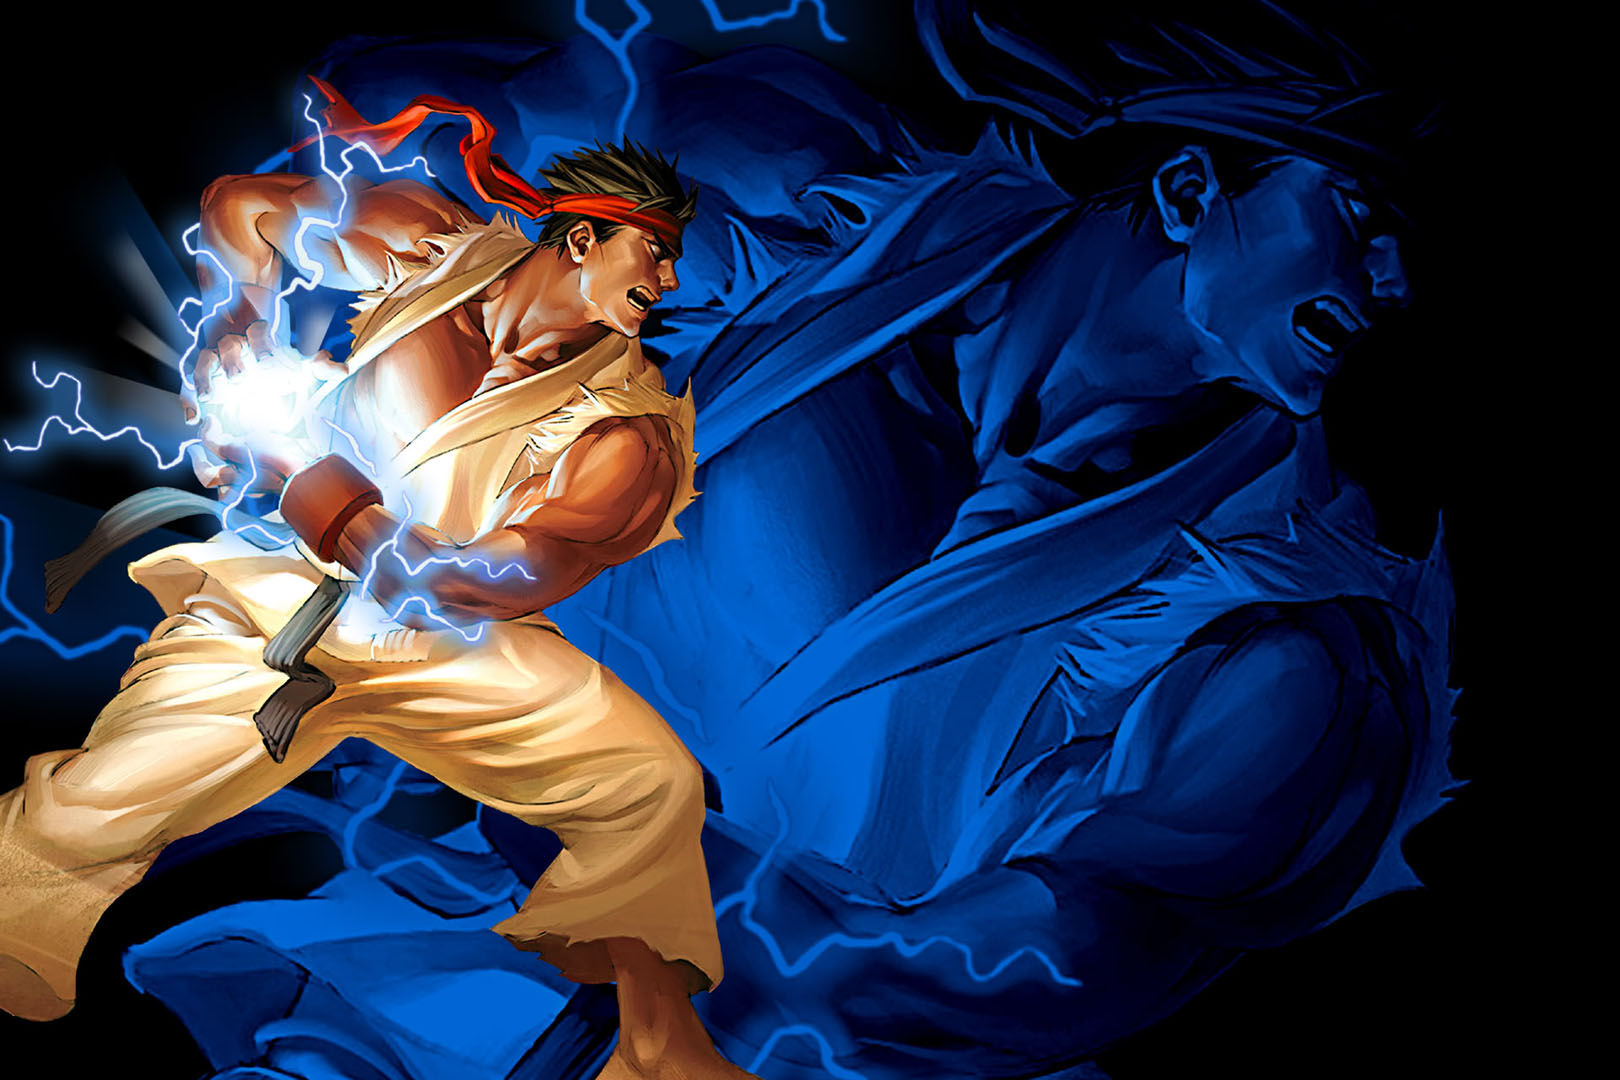 Street Fighter II Video Game HD Wallpapers HD Wallapers for Free